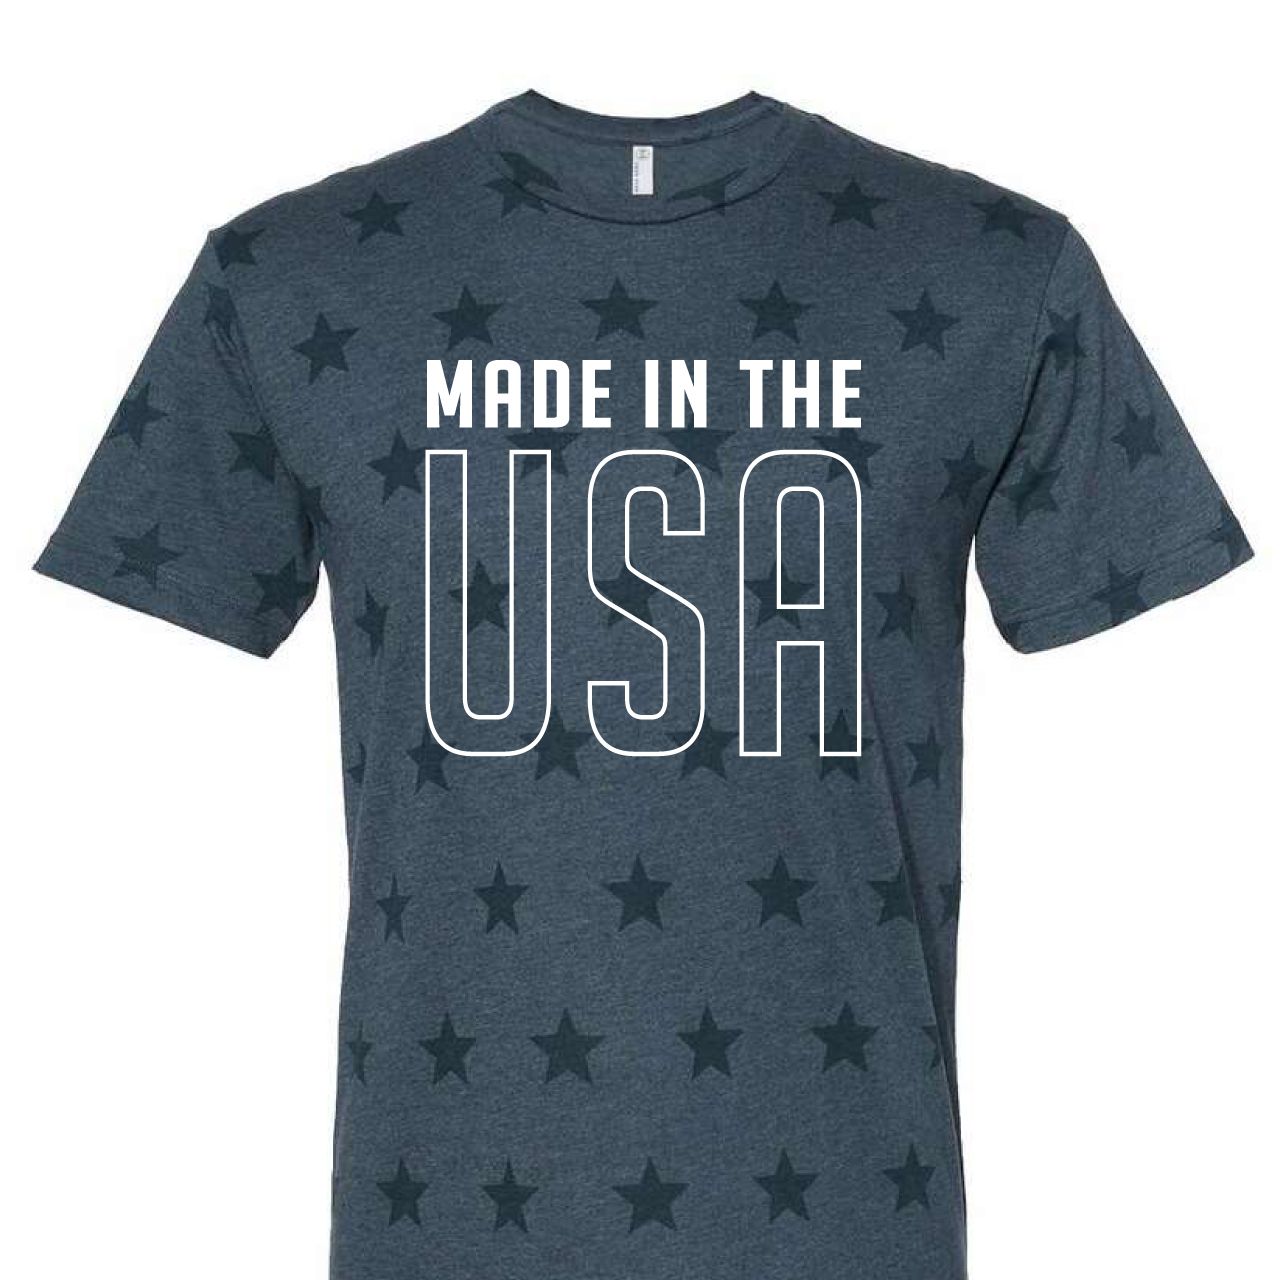 “Made in the USA” Navy Stars T-Shirt | Shop Southern Made & Southern Made Tees